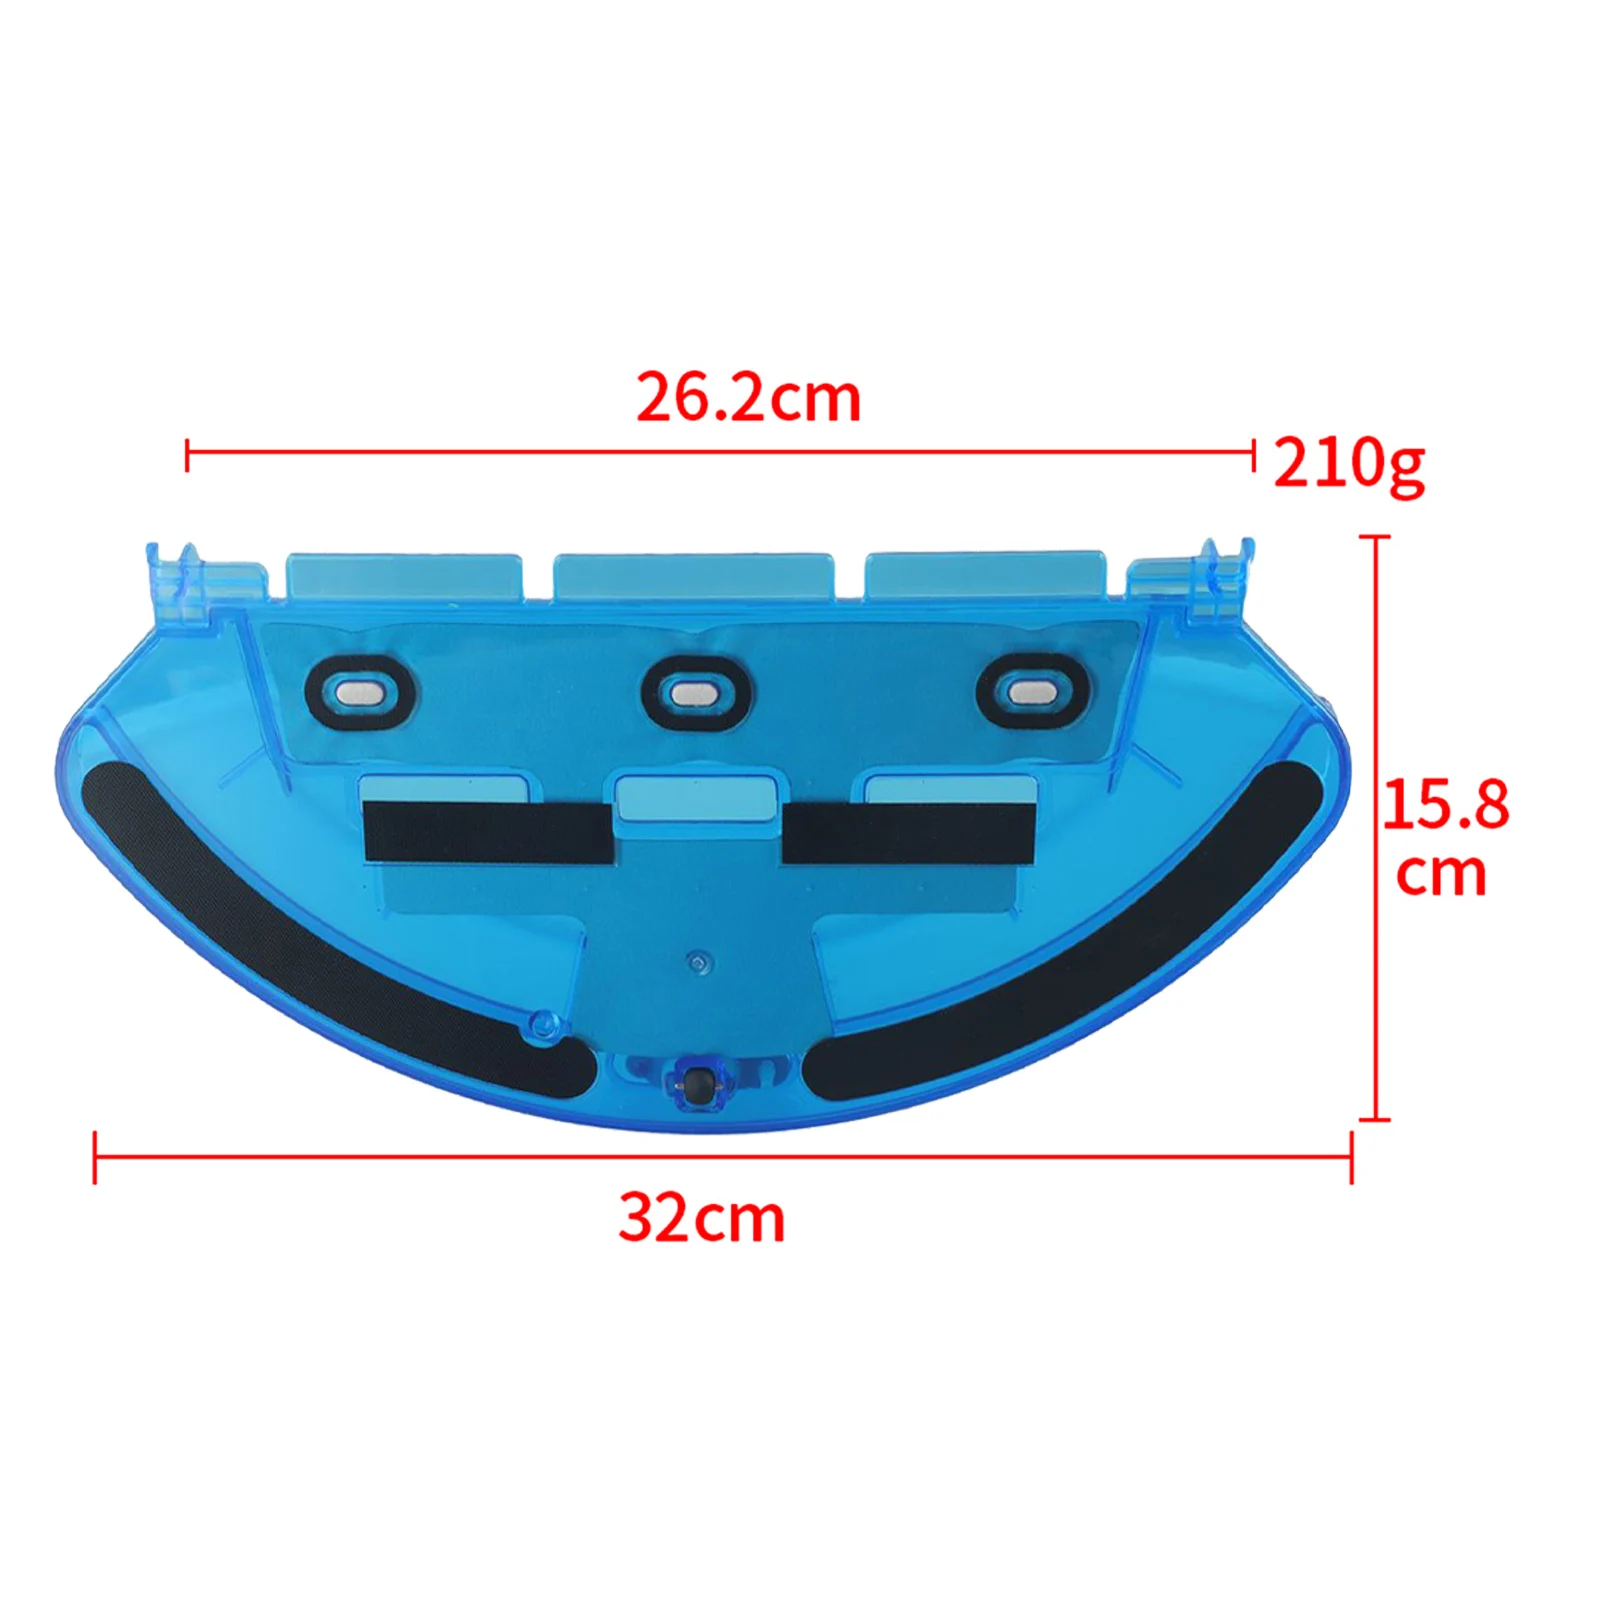 For Explorer 60 Series Explorer Robot Vacuum Cleaner More Sturdy Fine Workmanship For Tefal RG7447 RG7455 As Pictures Show 4pcs side brushes for tefal explorer serie 60 rg7447 rg7455 rg7447wh rg7455wh rr7455 7447 vacuum cleaner spare parts side brush